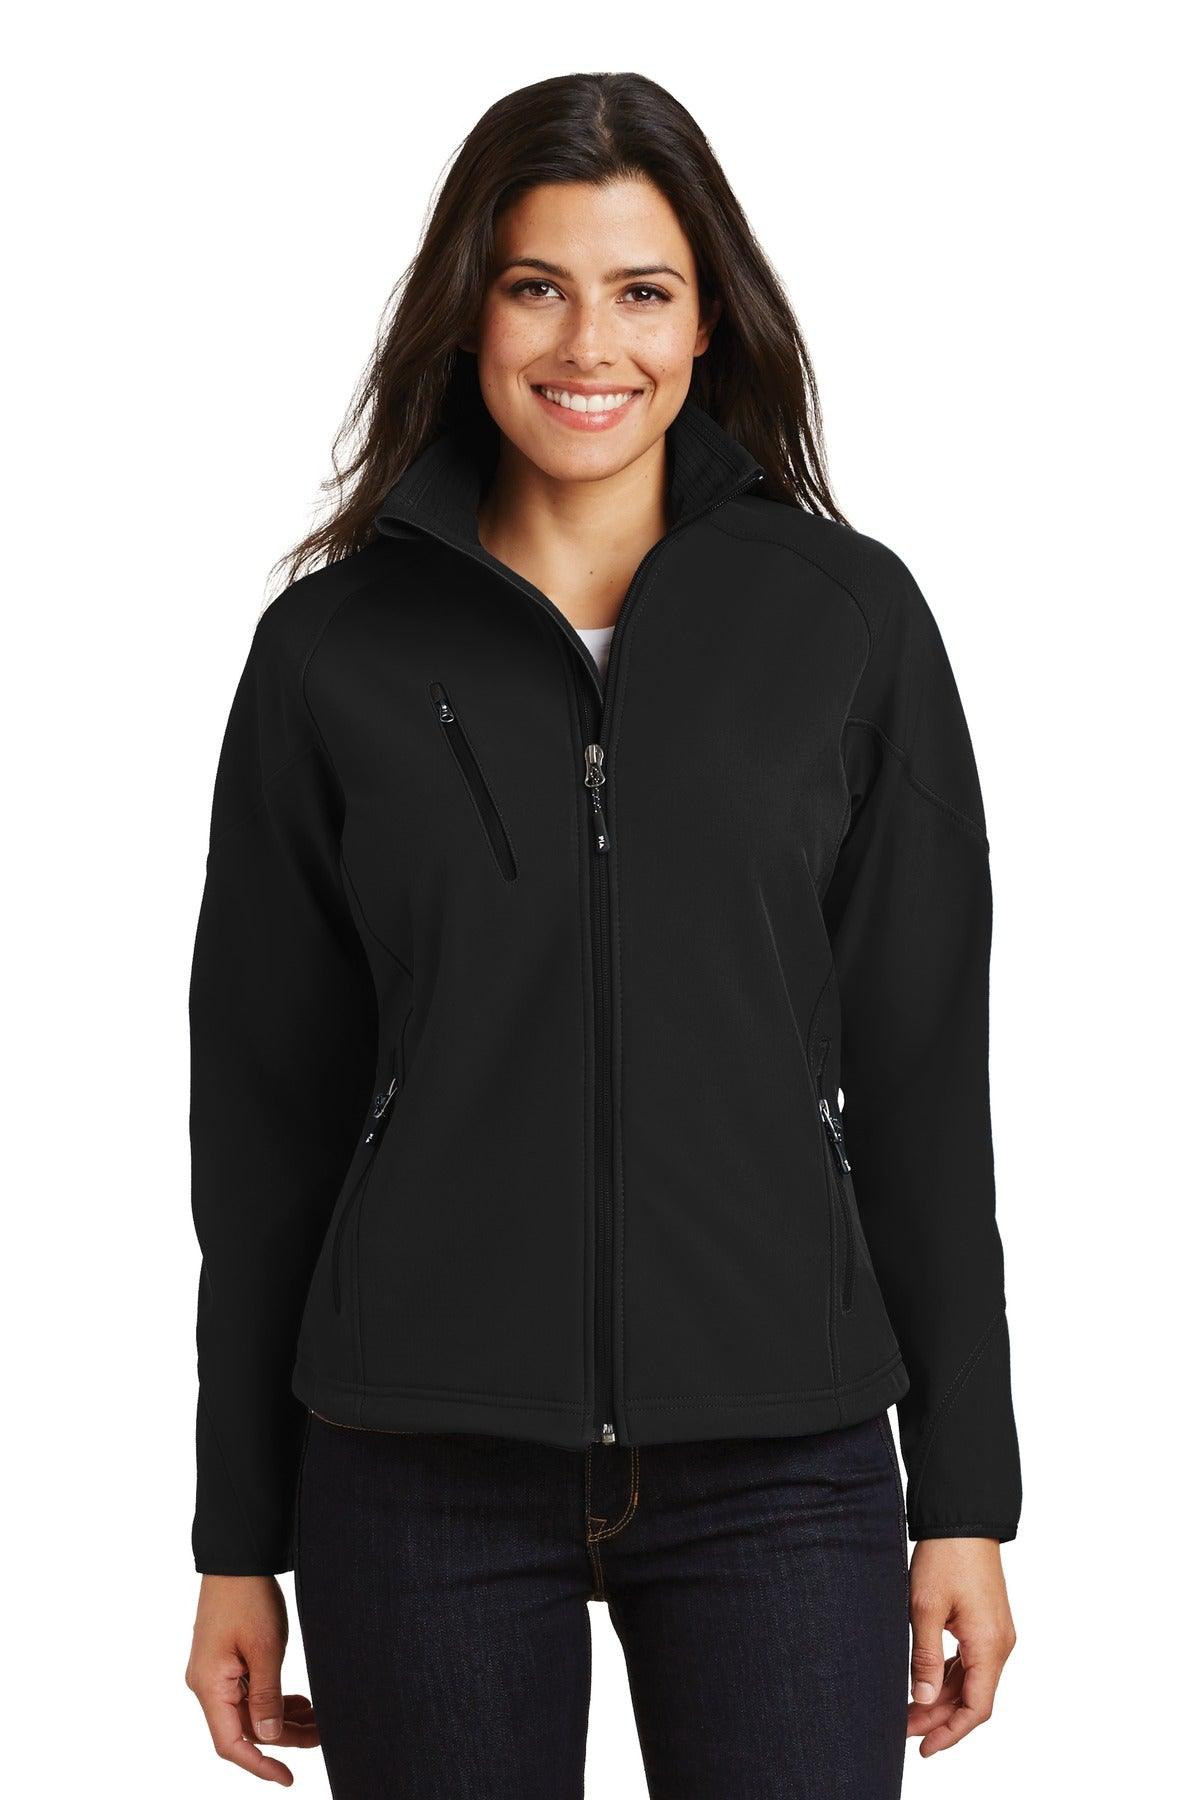 Port Authority Ladies Textured Soft Shell Jacket. L705 - Dresses Max